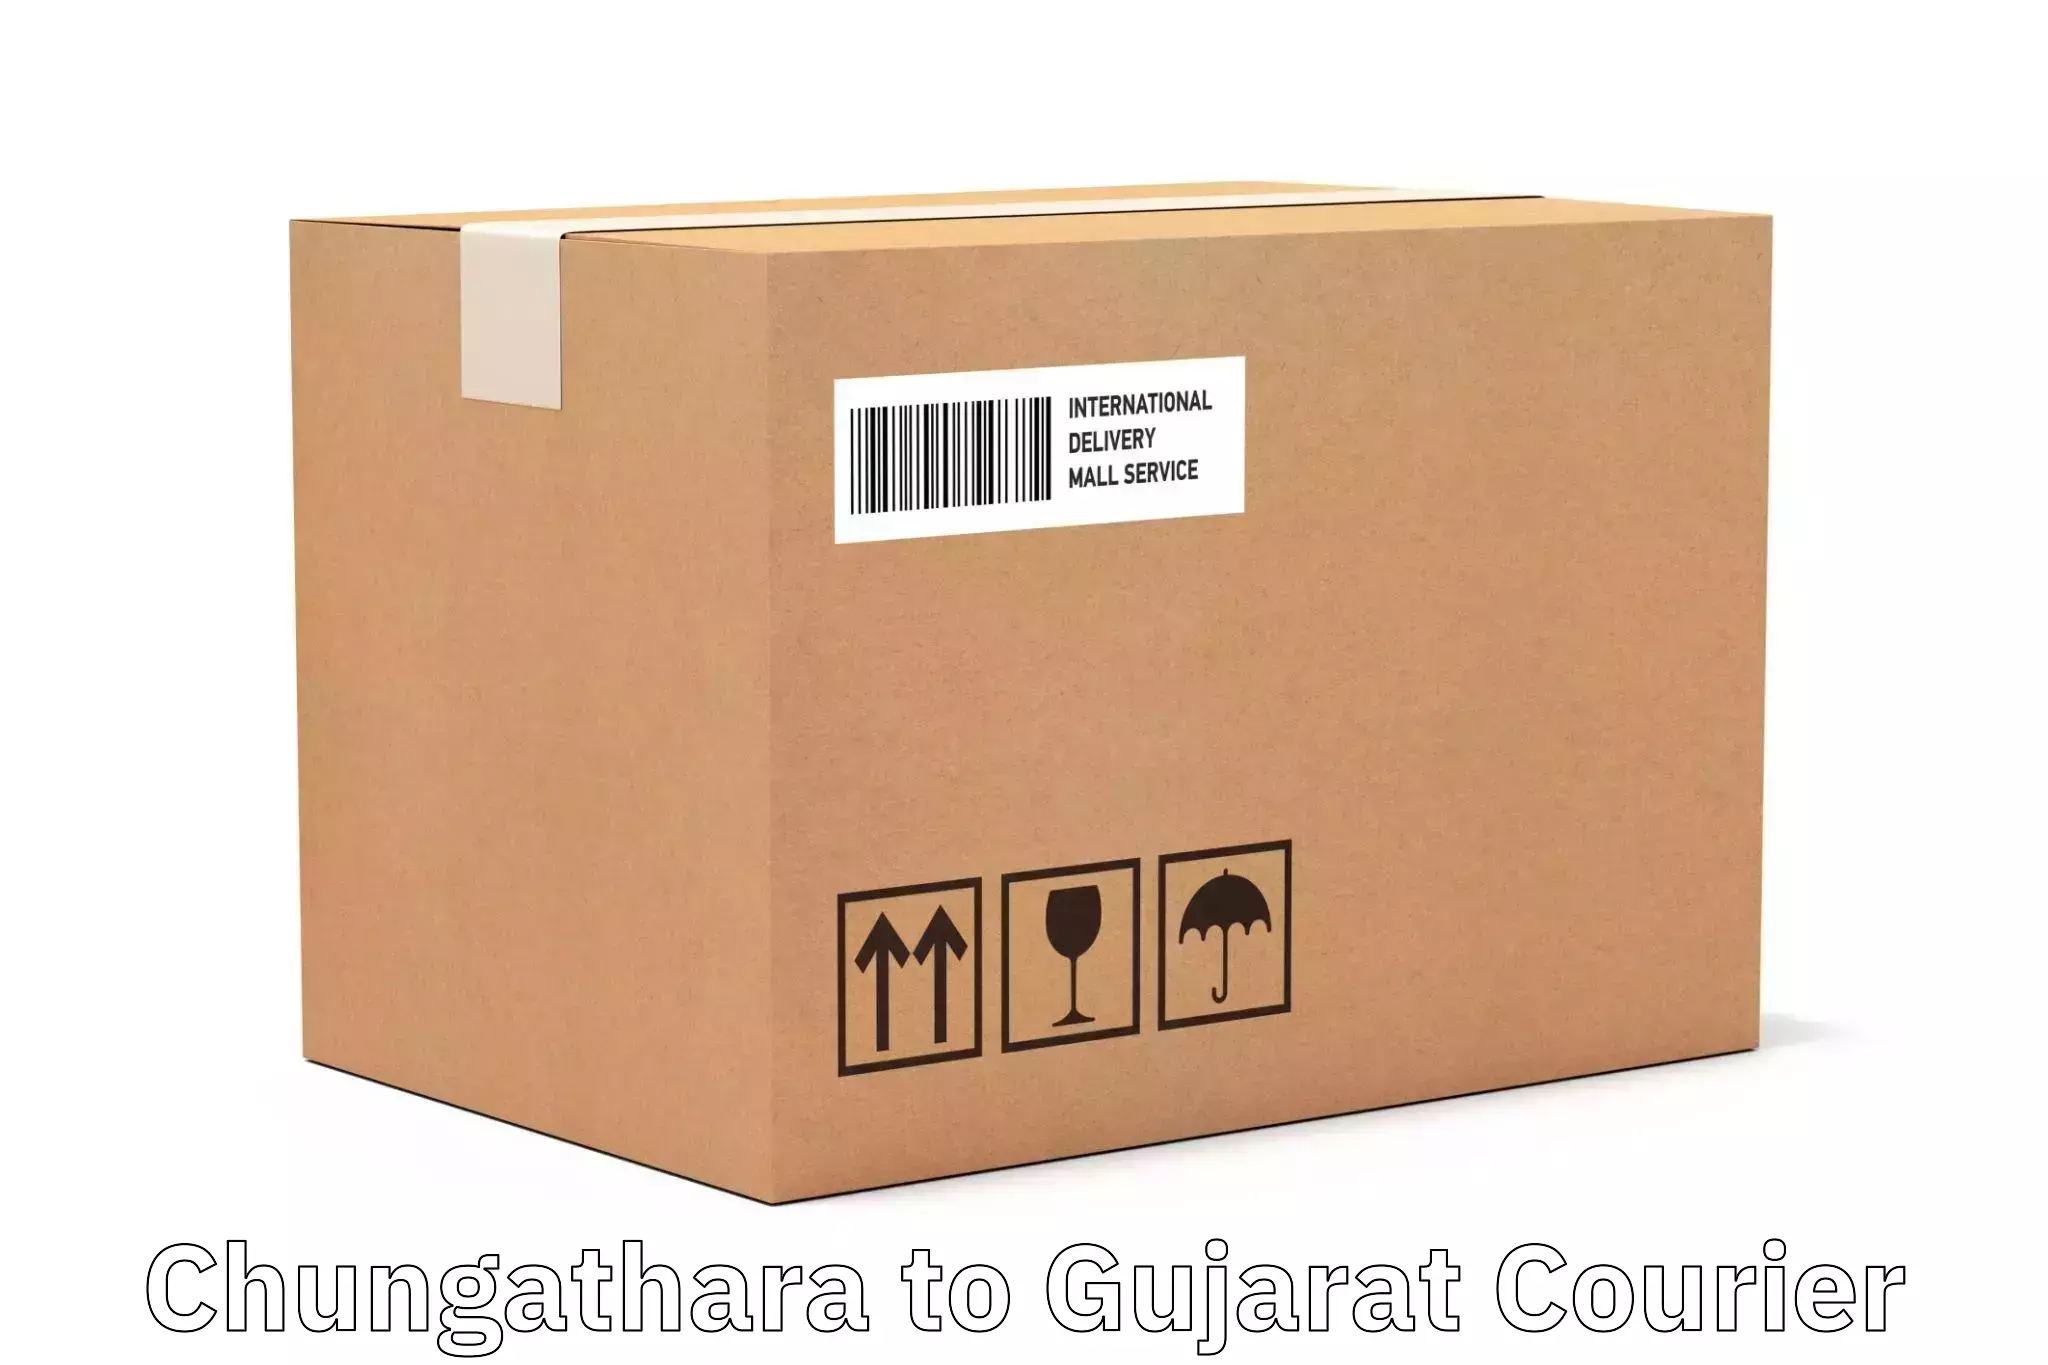 Nationwide parcel services in Chungathara to Patan Gujarat